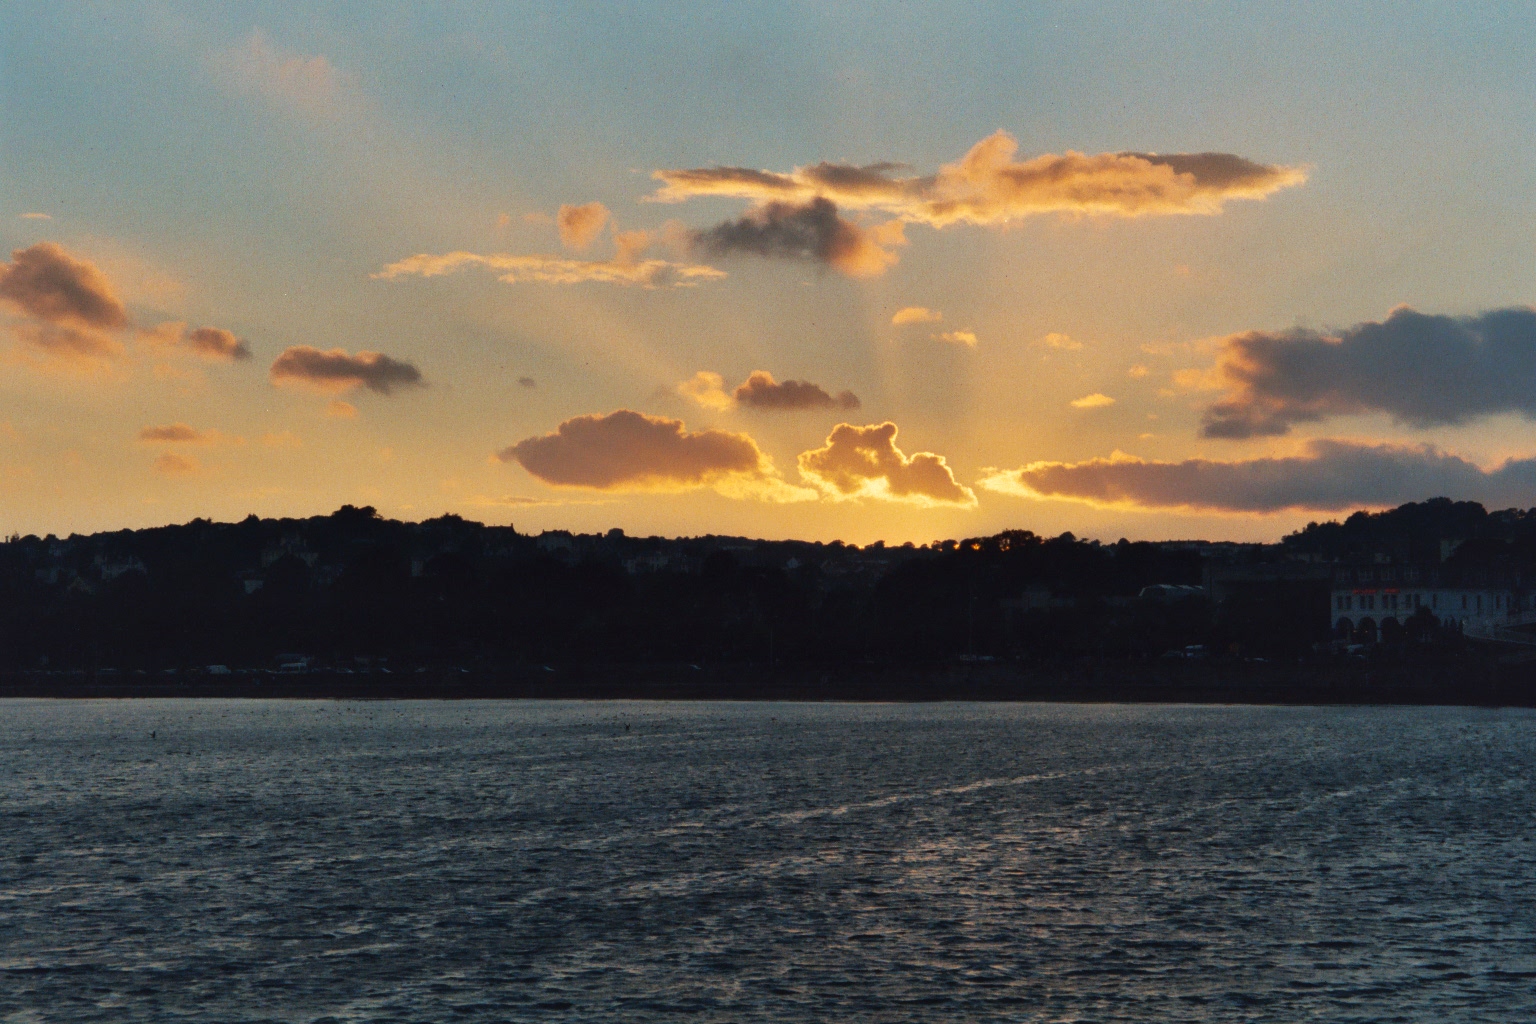 sunset over Torquay from The English Channel